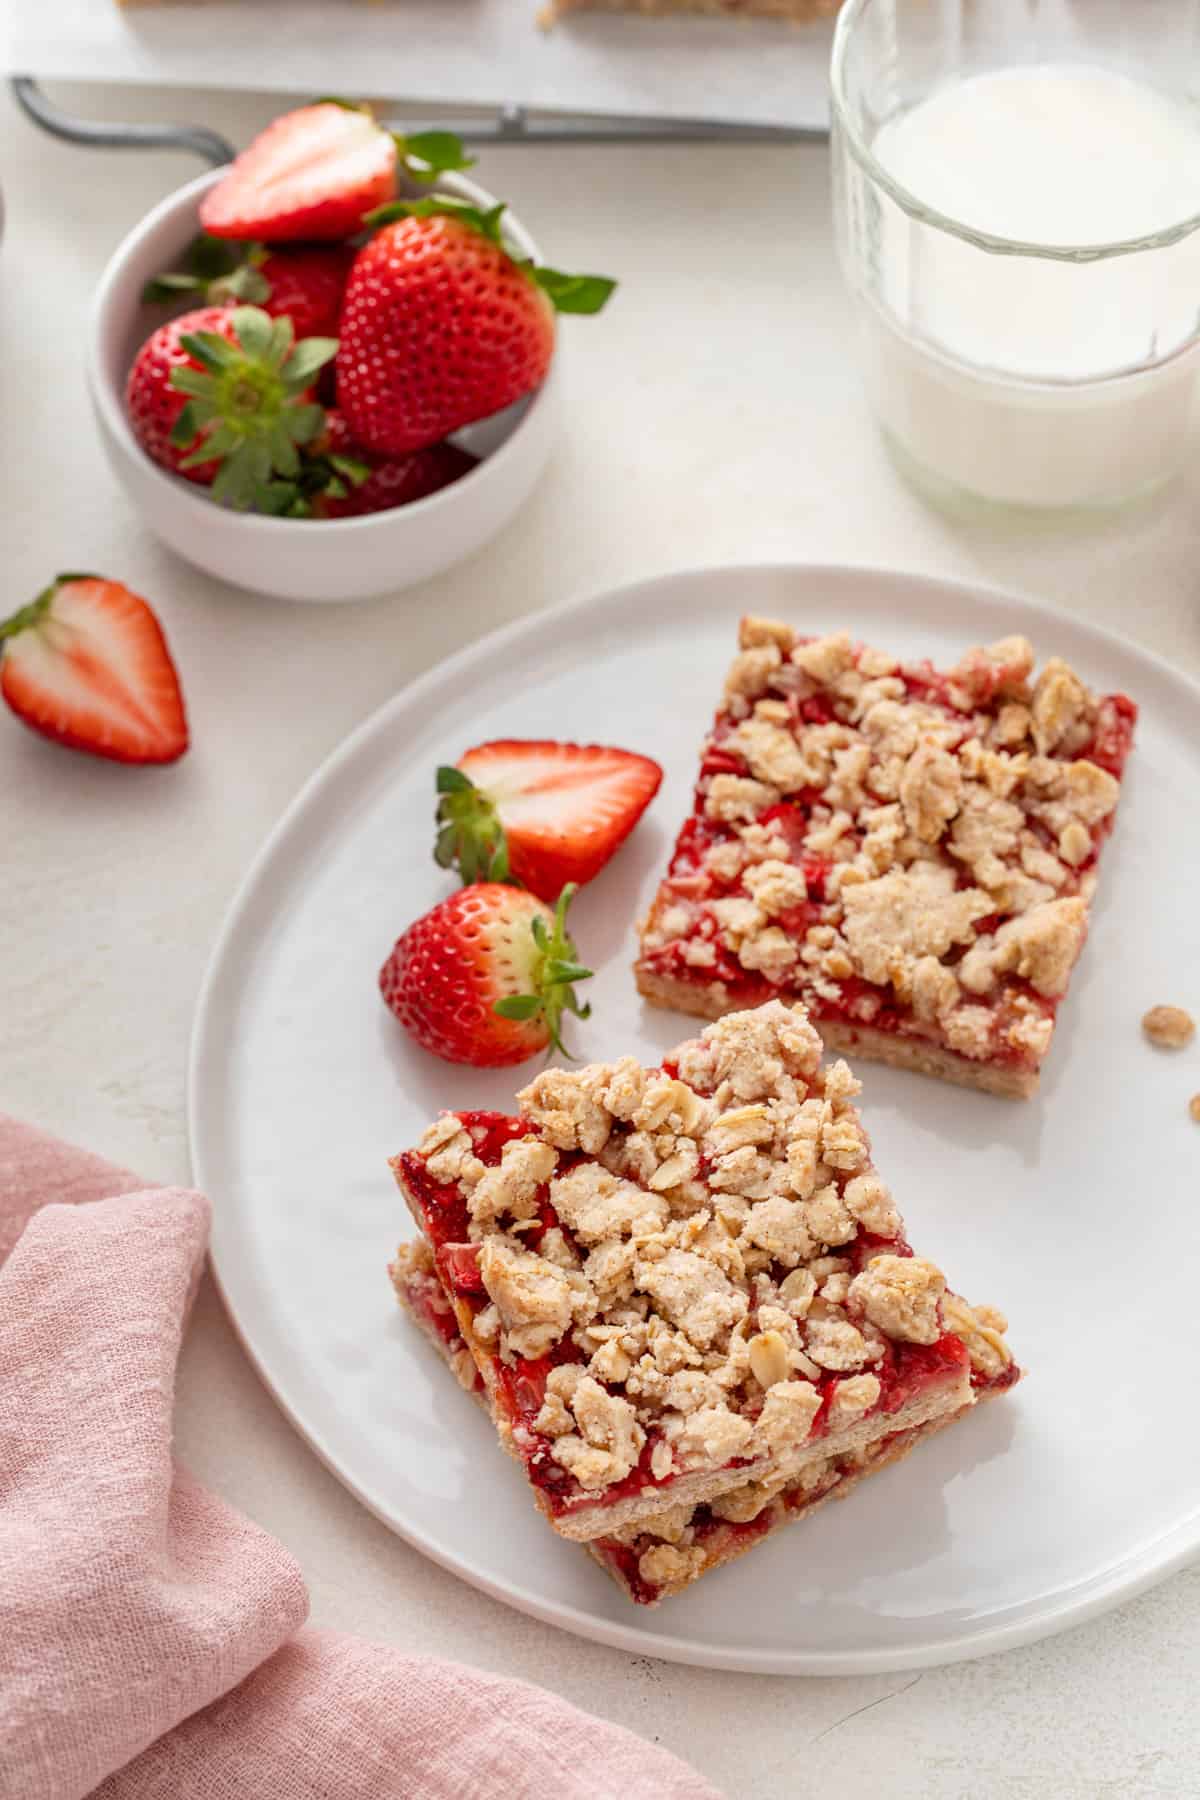 Strawberry oatmeal bars arranged next to fresh strawberries on a white plate.